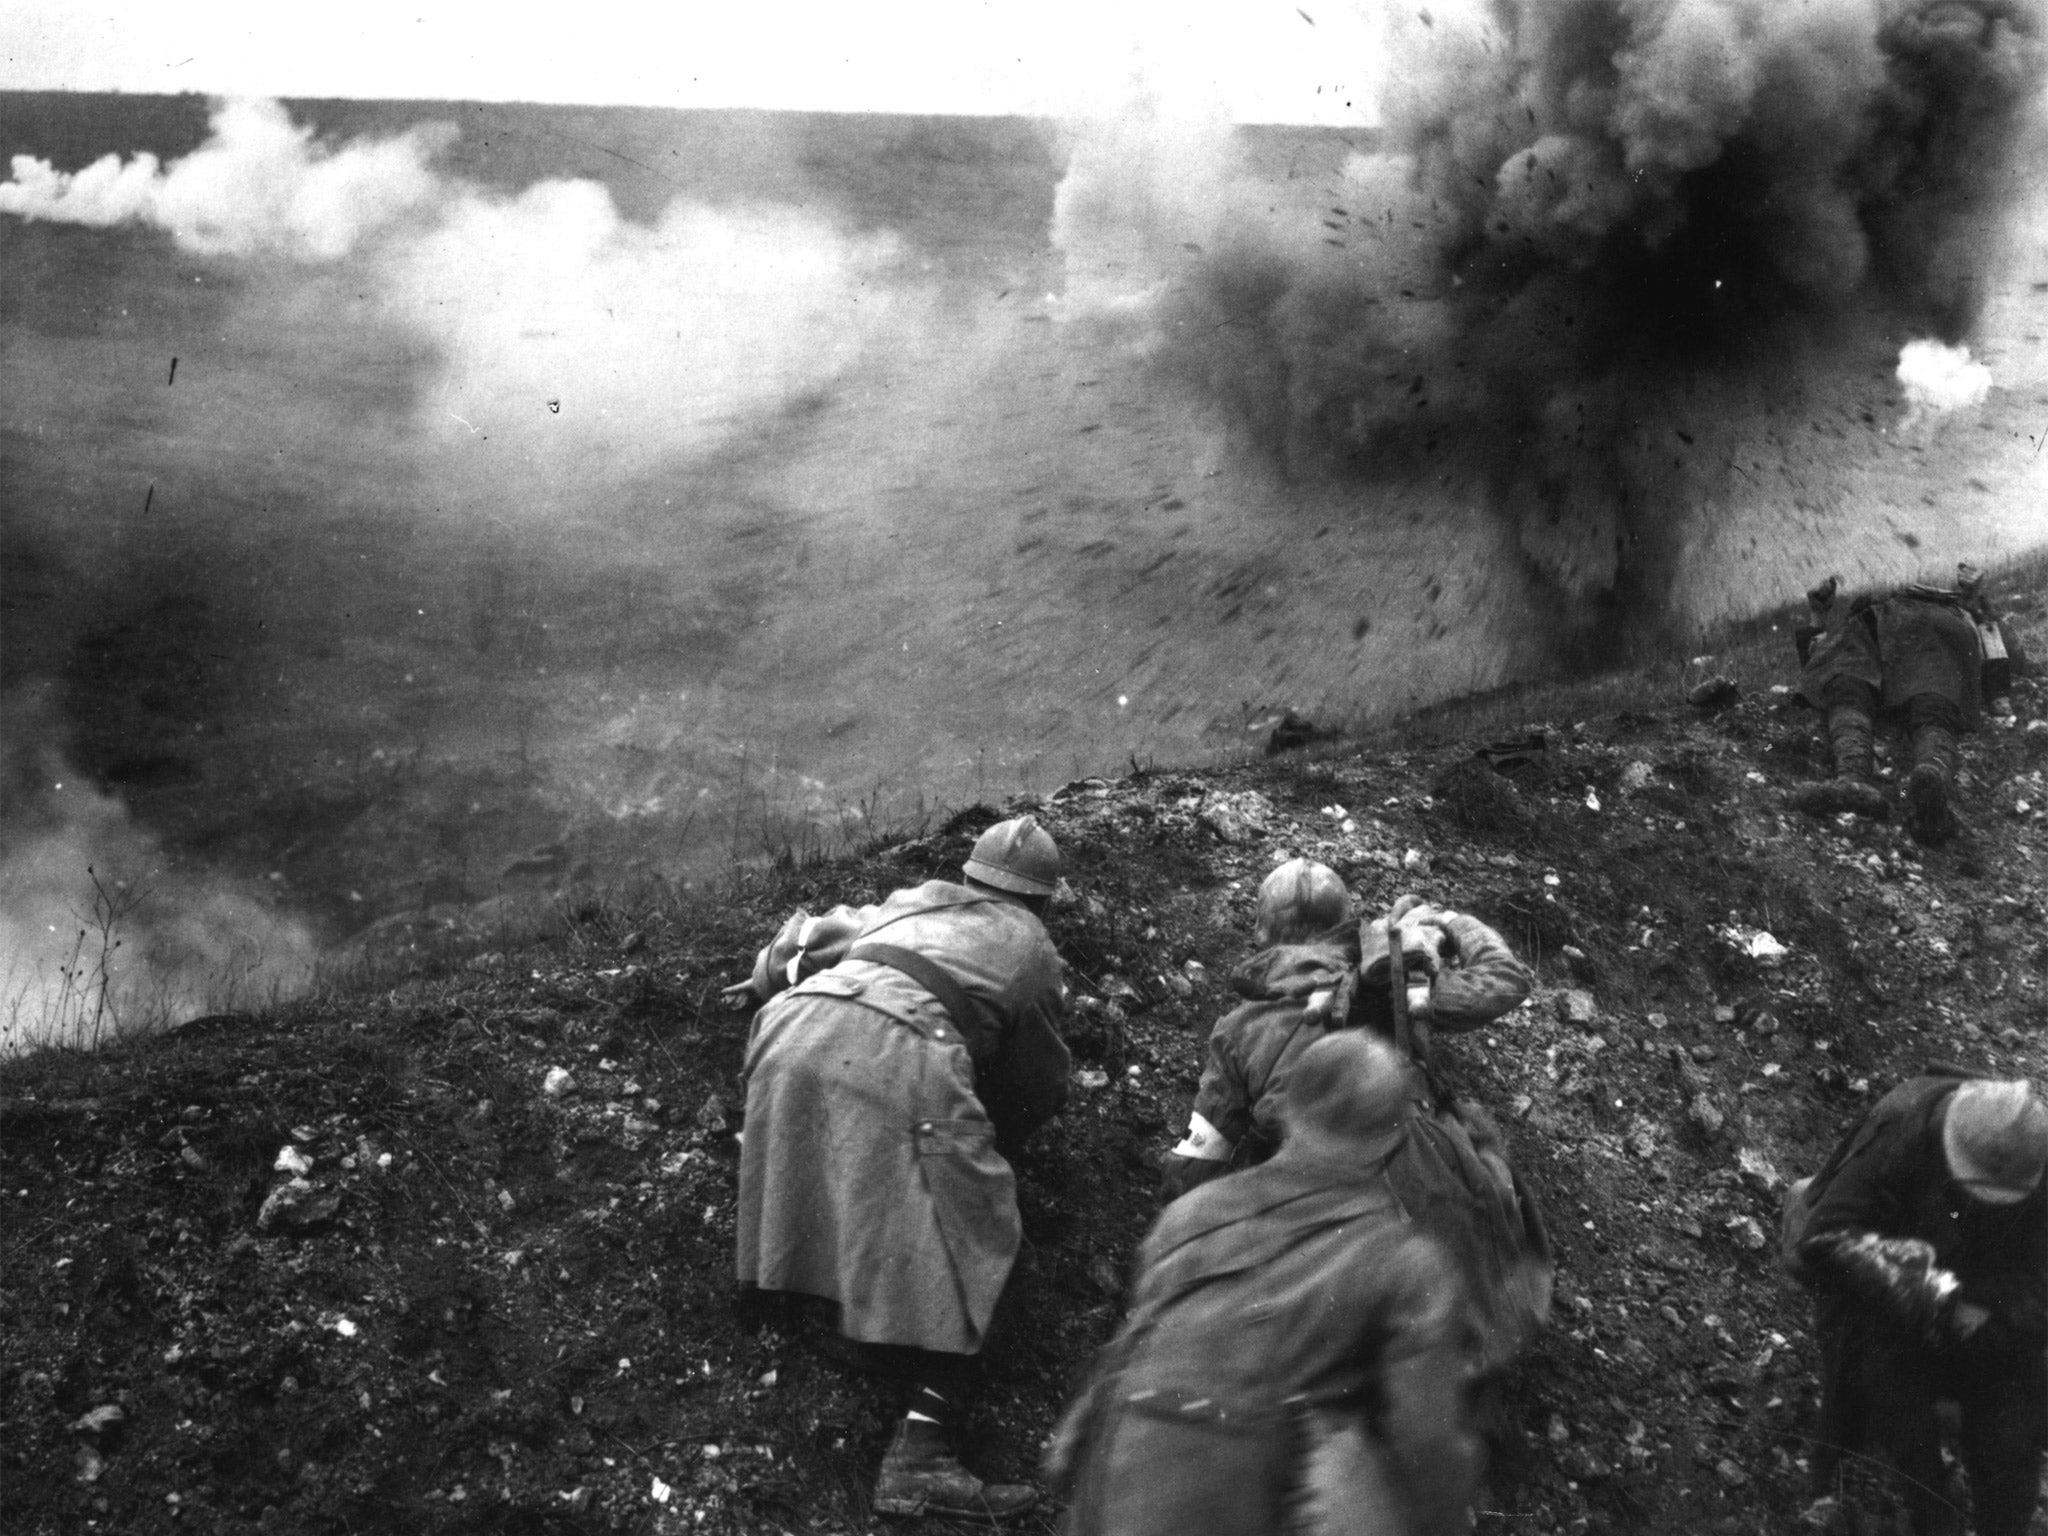 French troops under shellfire during the Battle of Verdun